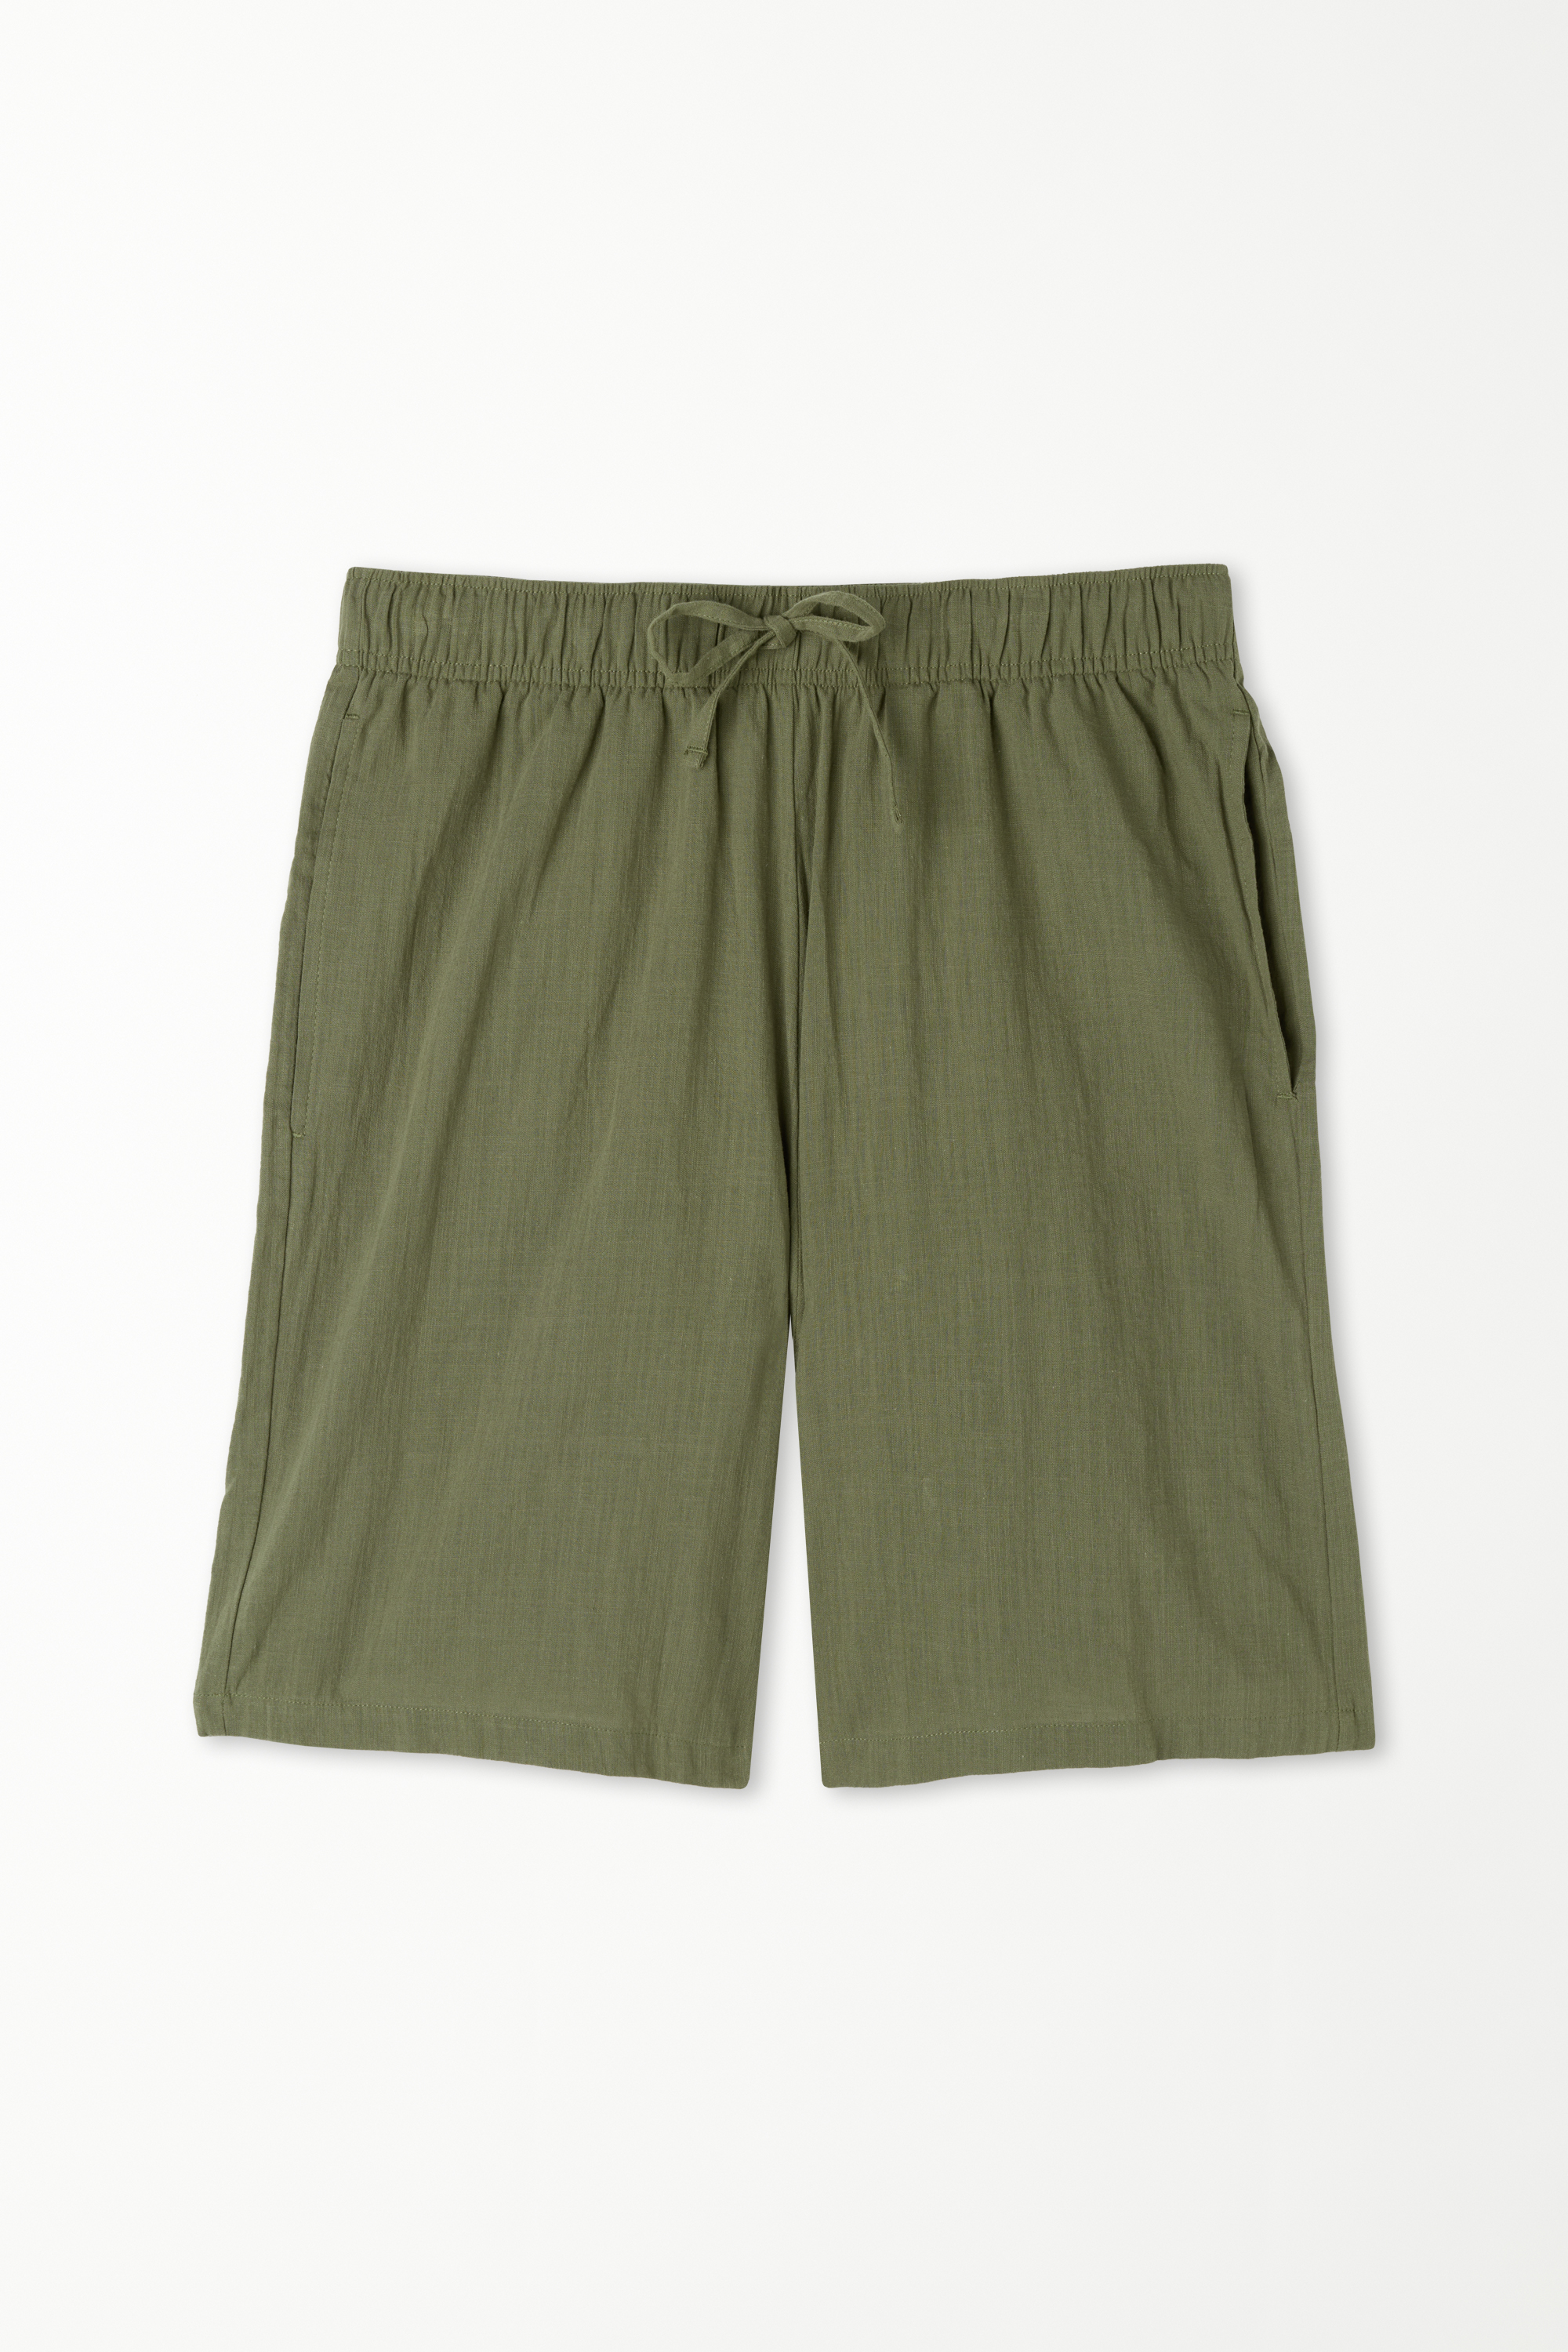 Super Light Cotton Shorts with Pockets